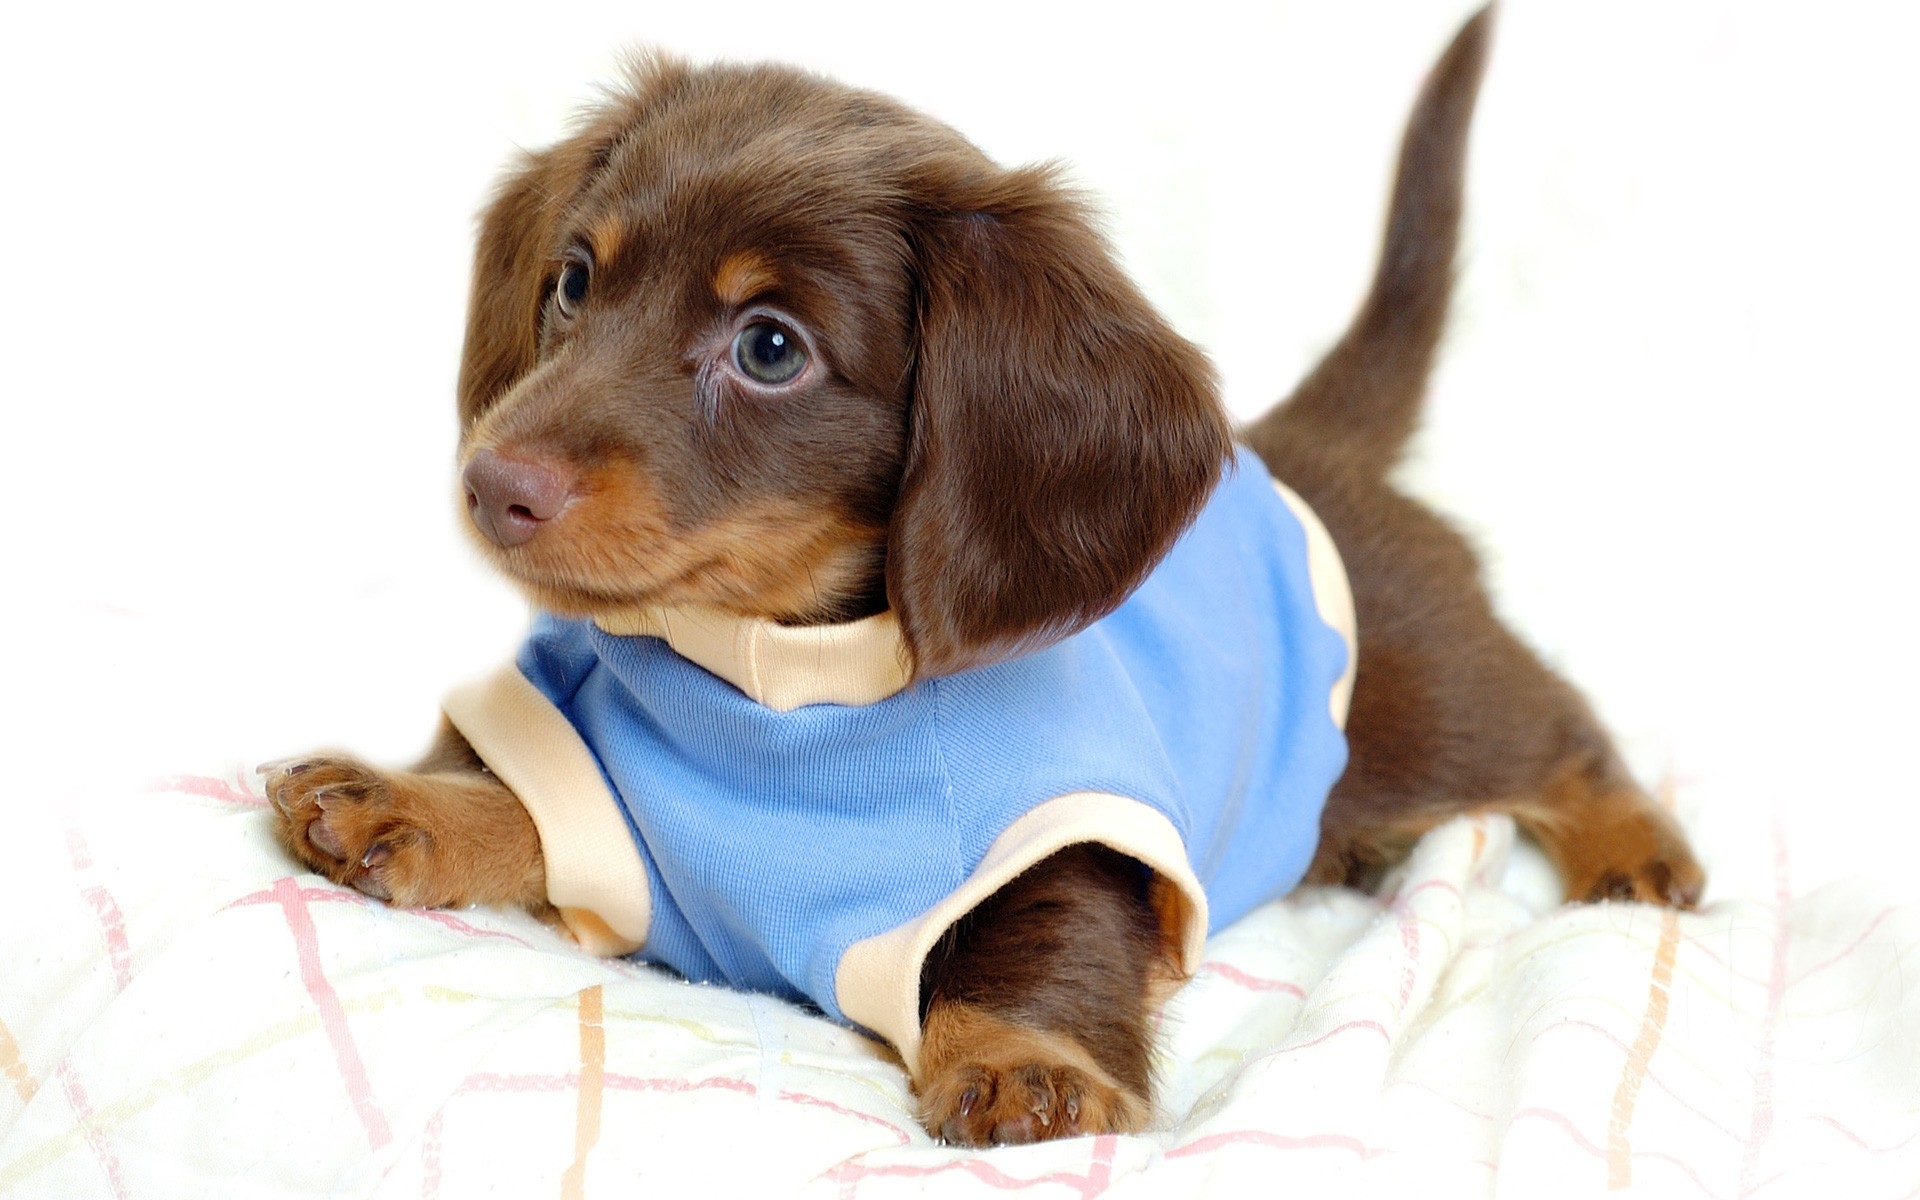 dogs cute dog pet little mammal canine puppy animal adorable looking funny sit puppies